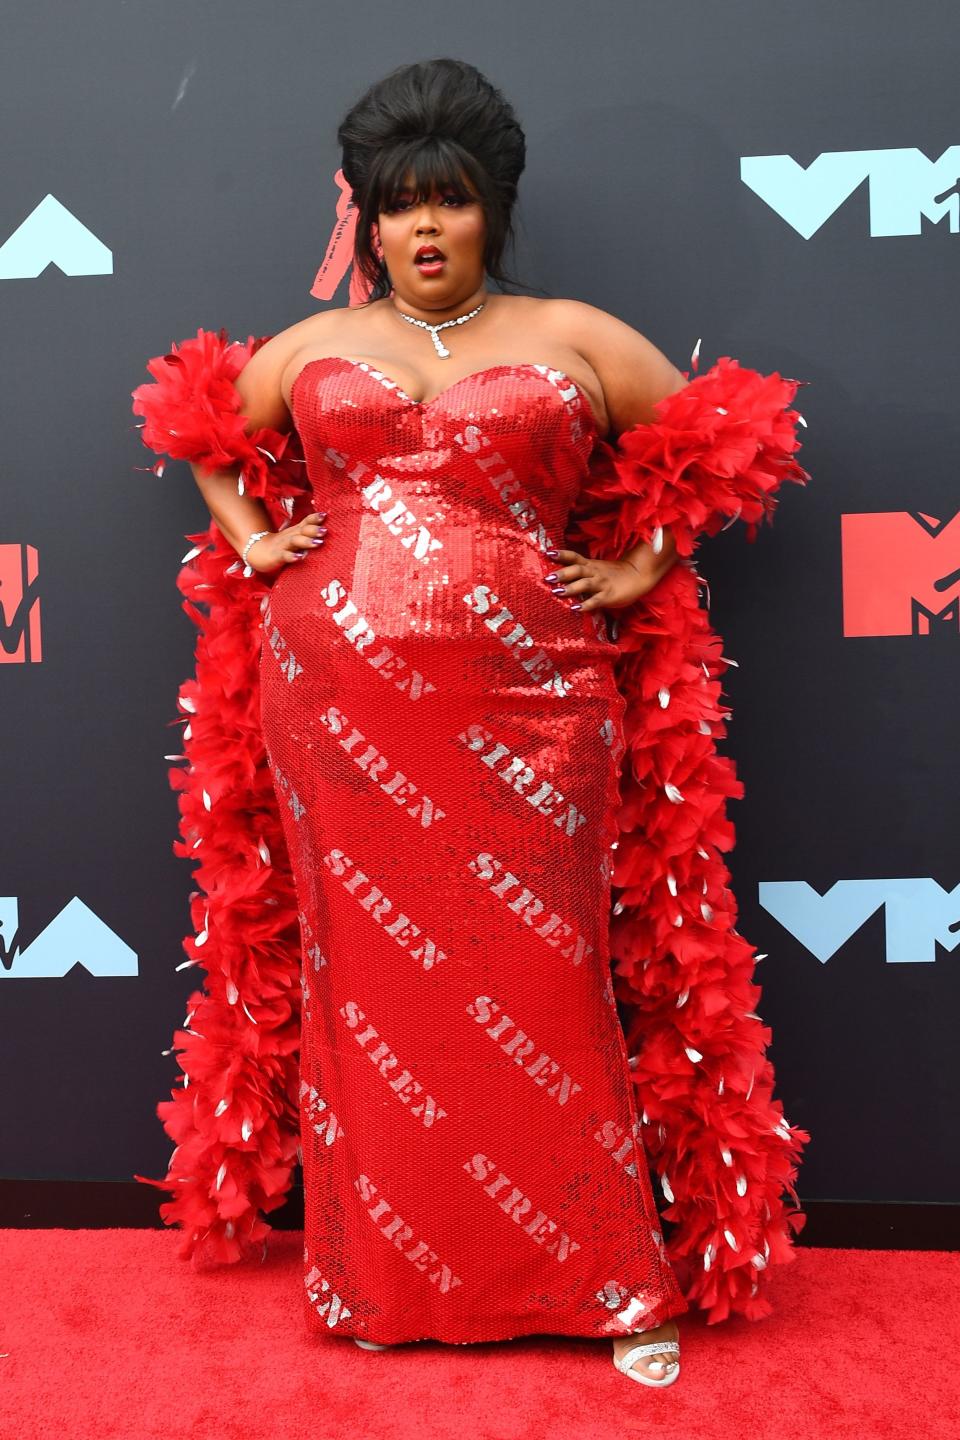 US singer Lizzo arrives for the 2019 MTV Video Music Awards at the Prudential Center in Newark, New Jersey on August 26, 2019. (Photo by Johannes EISELE / AFP)        (Photo credit should read JOHANNES EISELE/AFP/Getty Images)